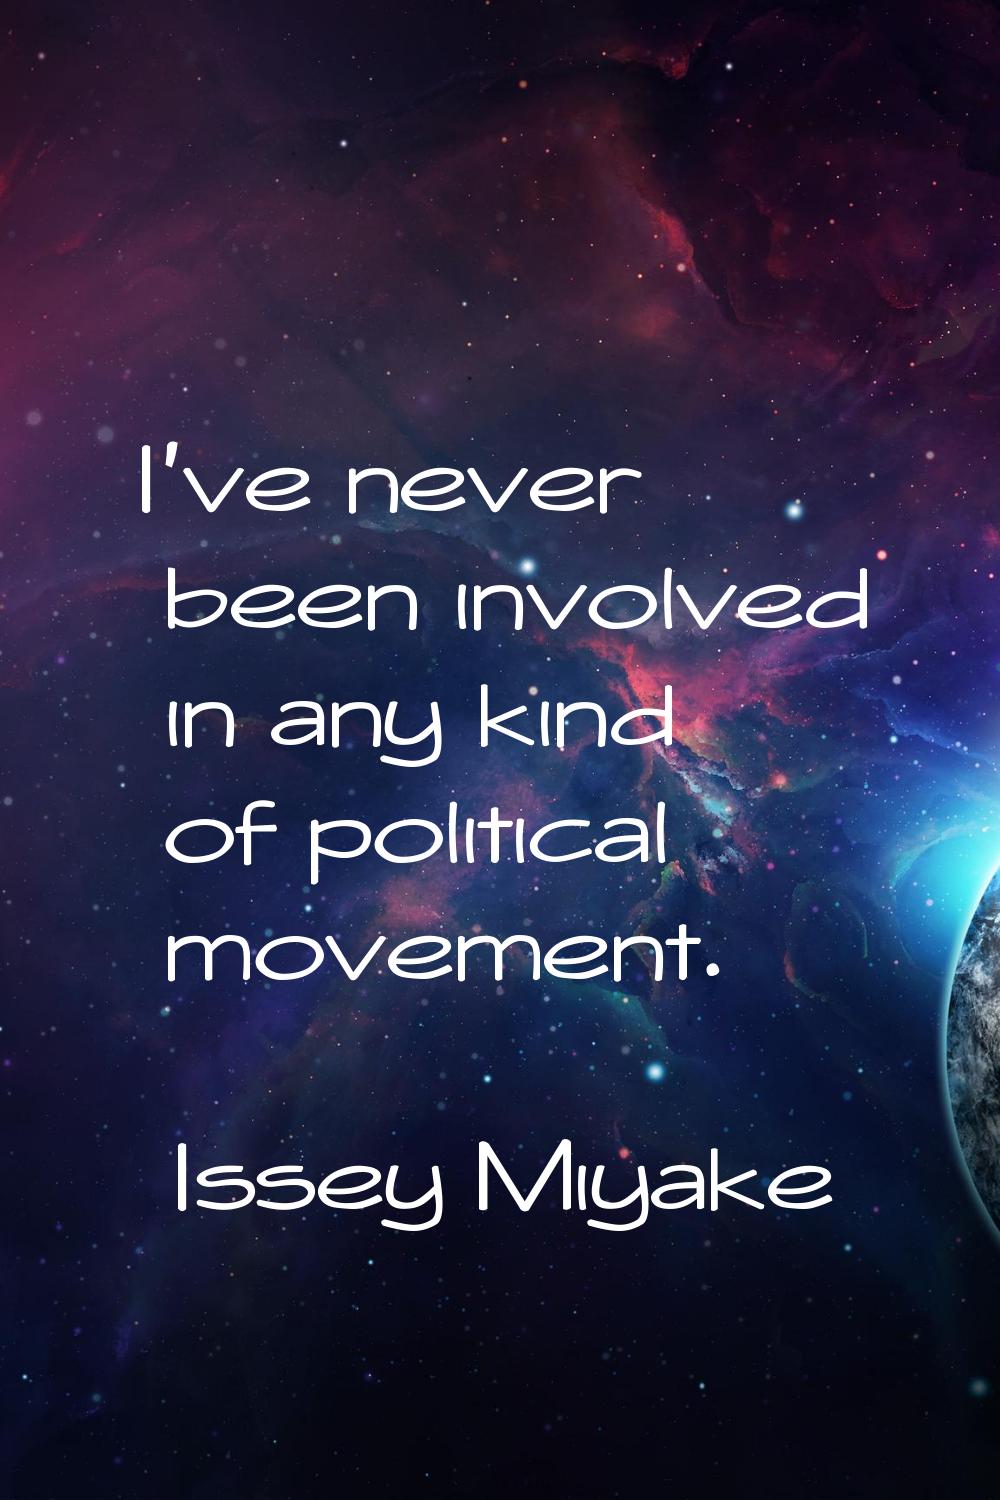 I've never been involved in any kind of political movement.